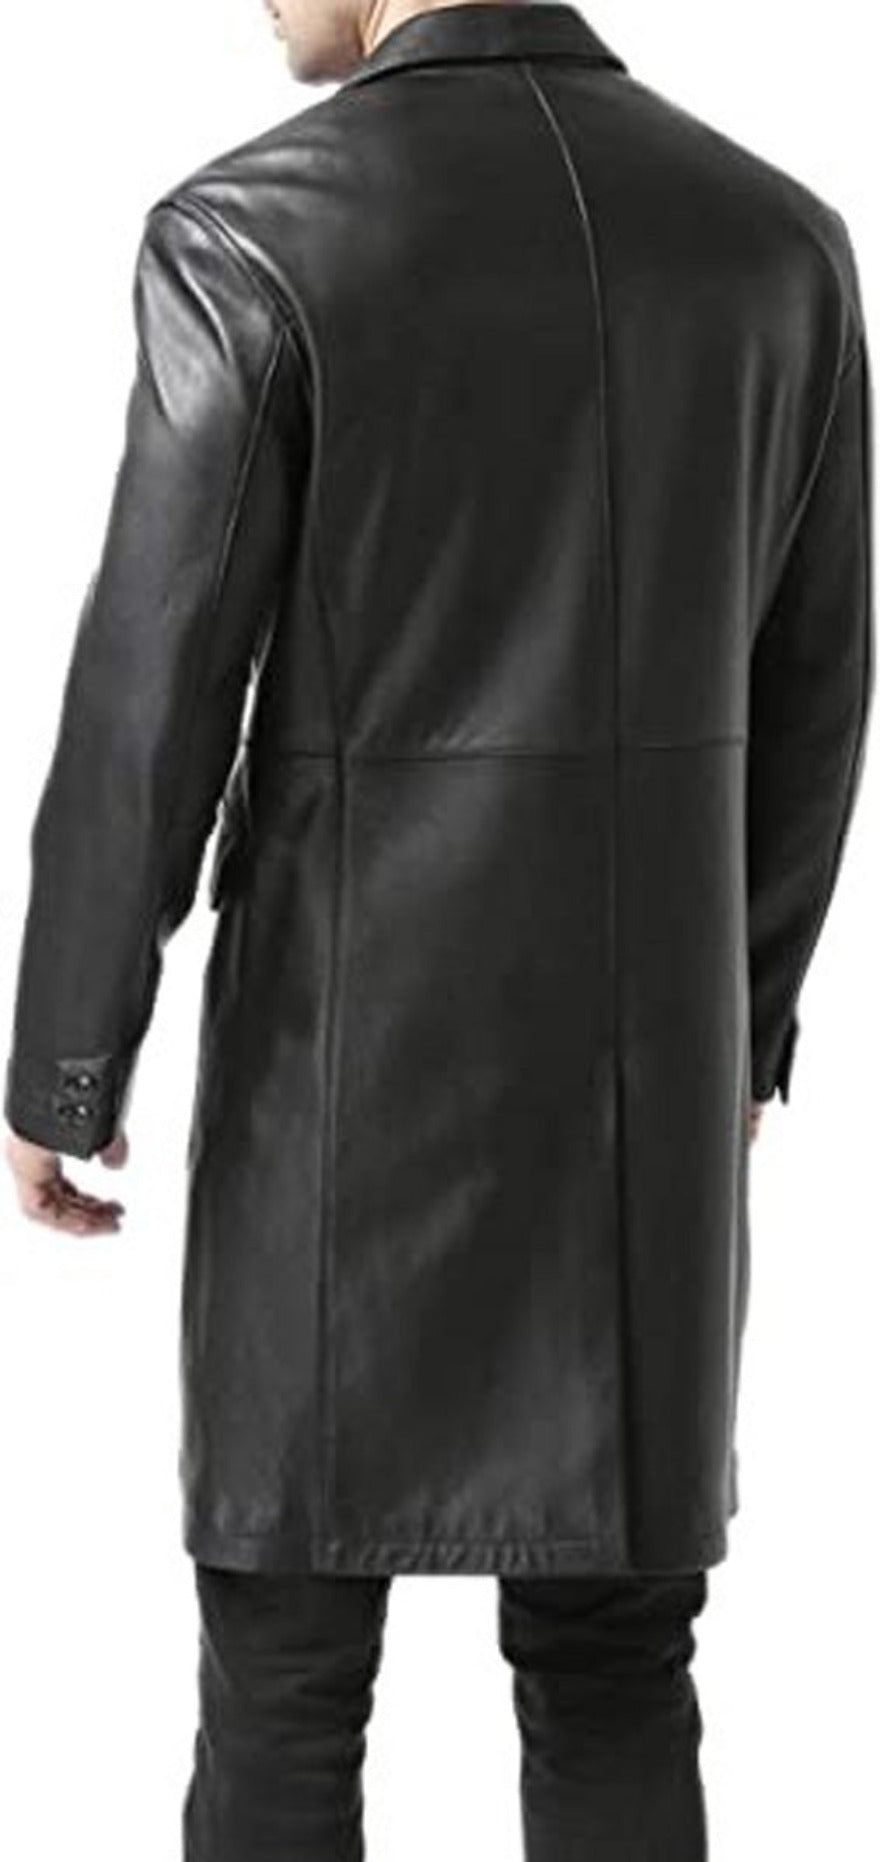 Model wearing a black leather long coat, back view.